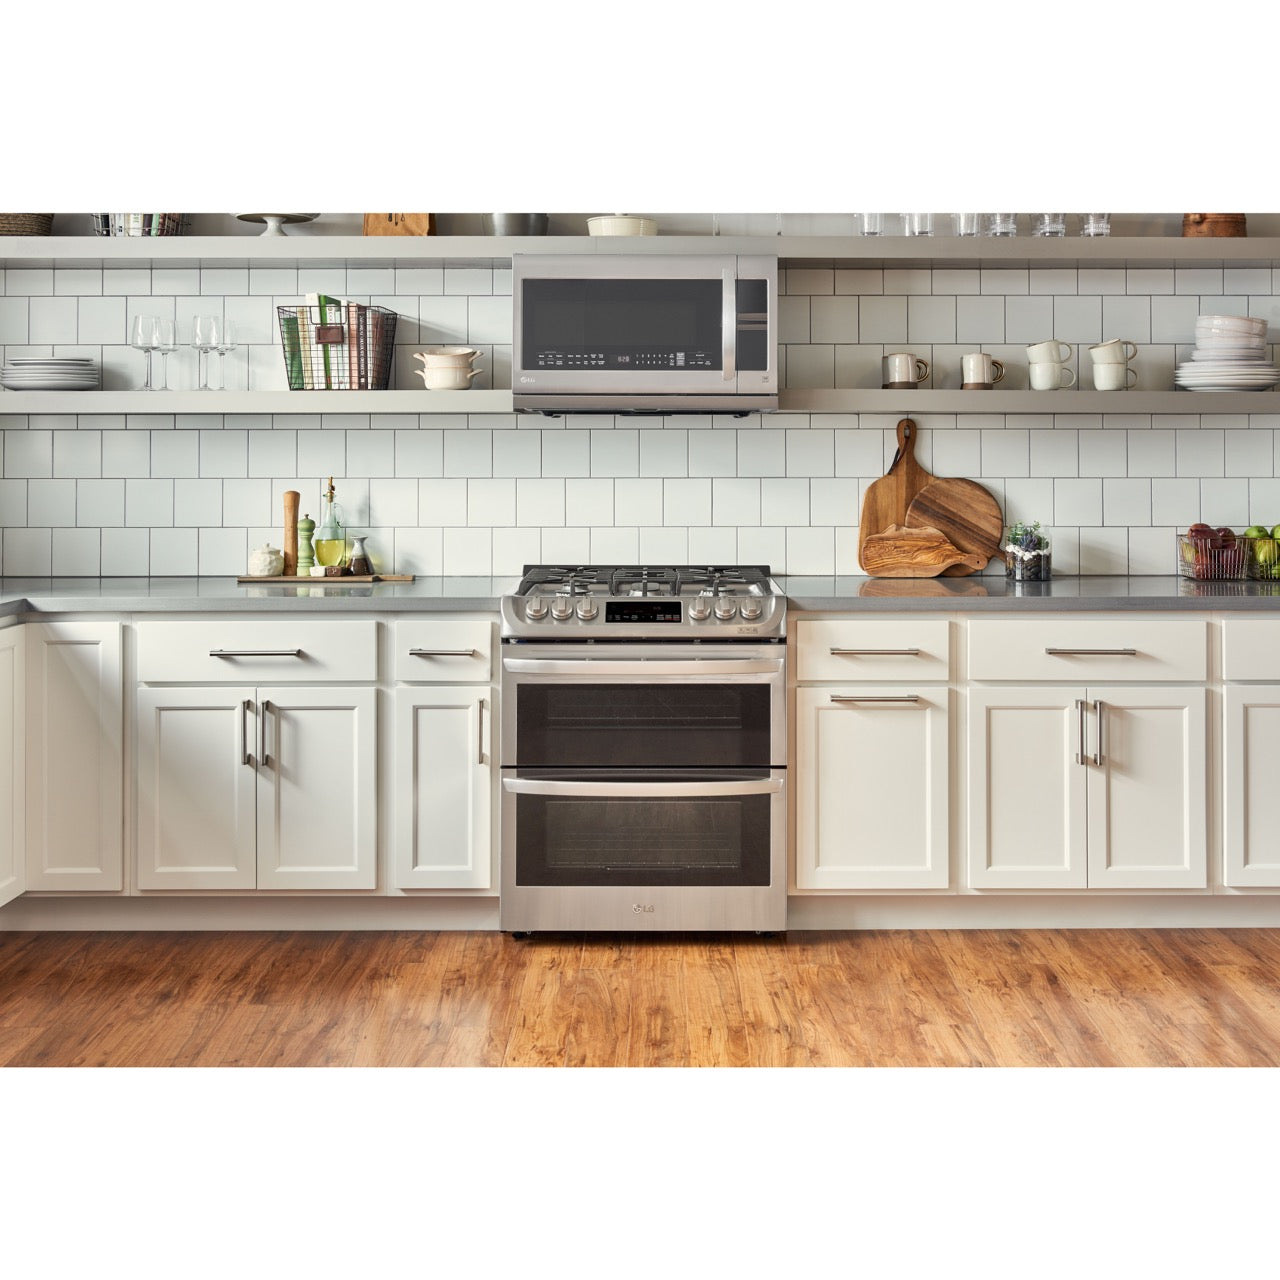 LG Electronics 6.9-Cu. Ft. Gas Slide-In Range with Double Oven and ProBake Convection, Stainless Steel (LTG4715ST)